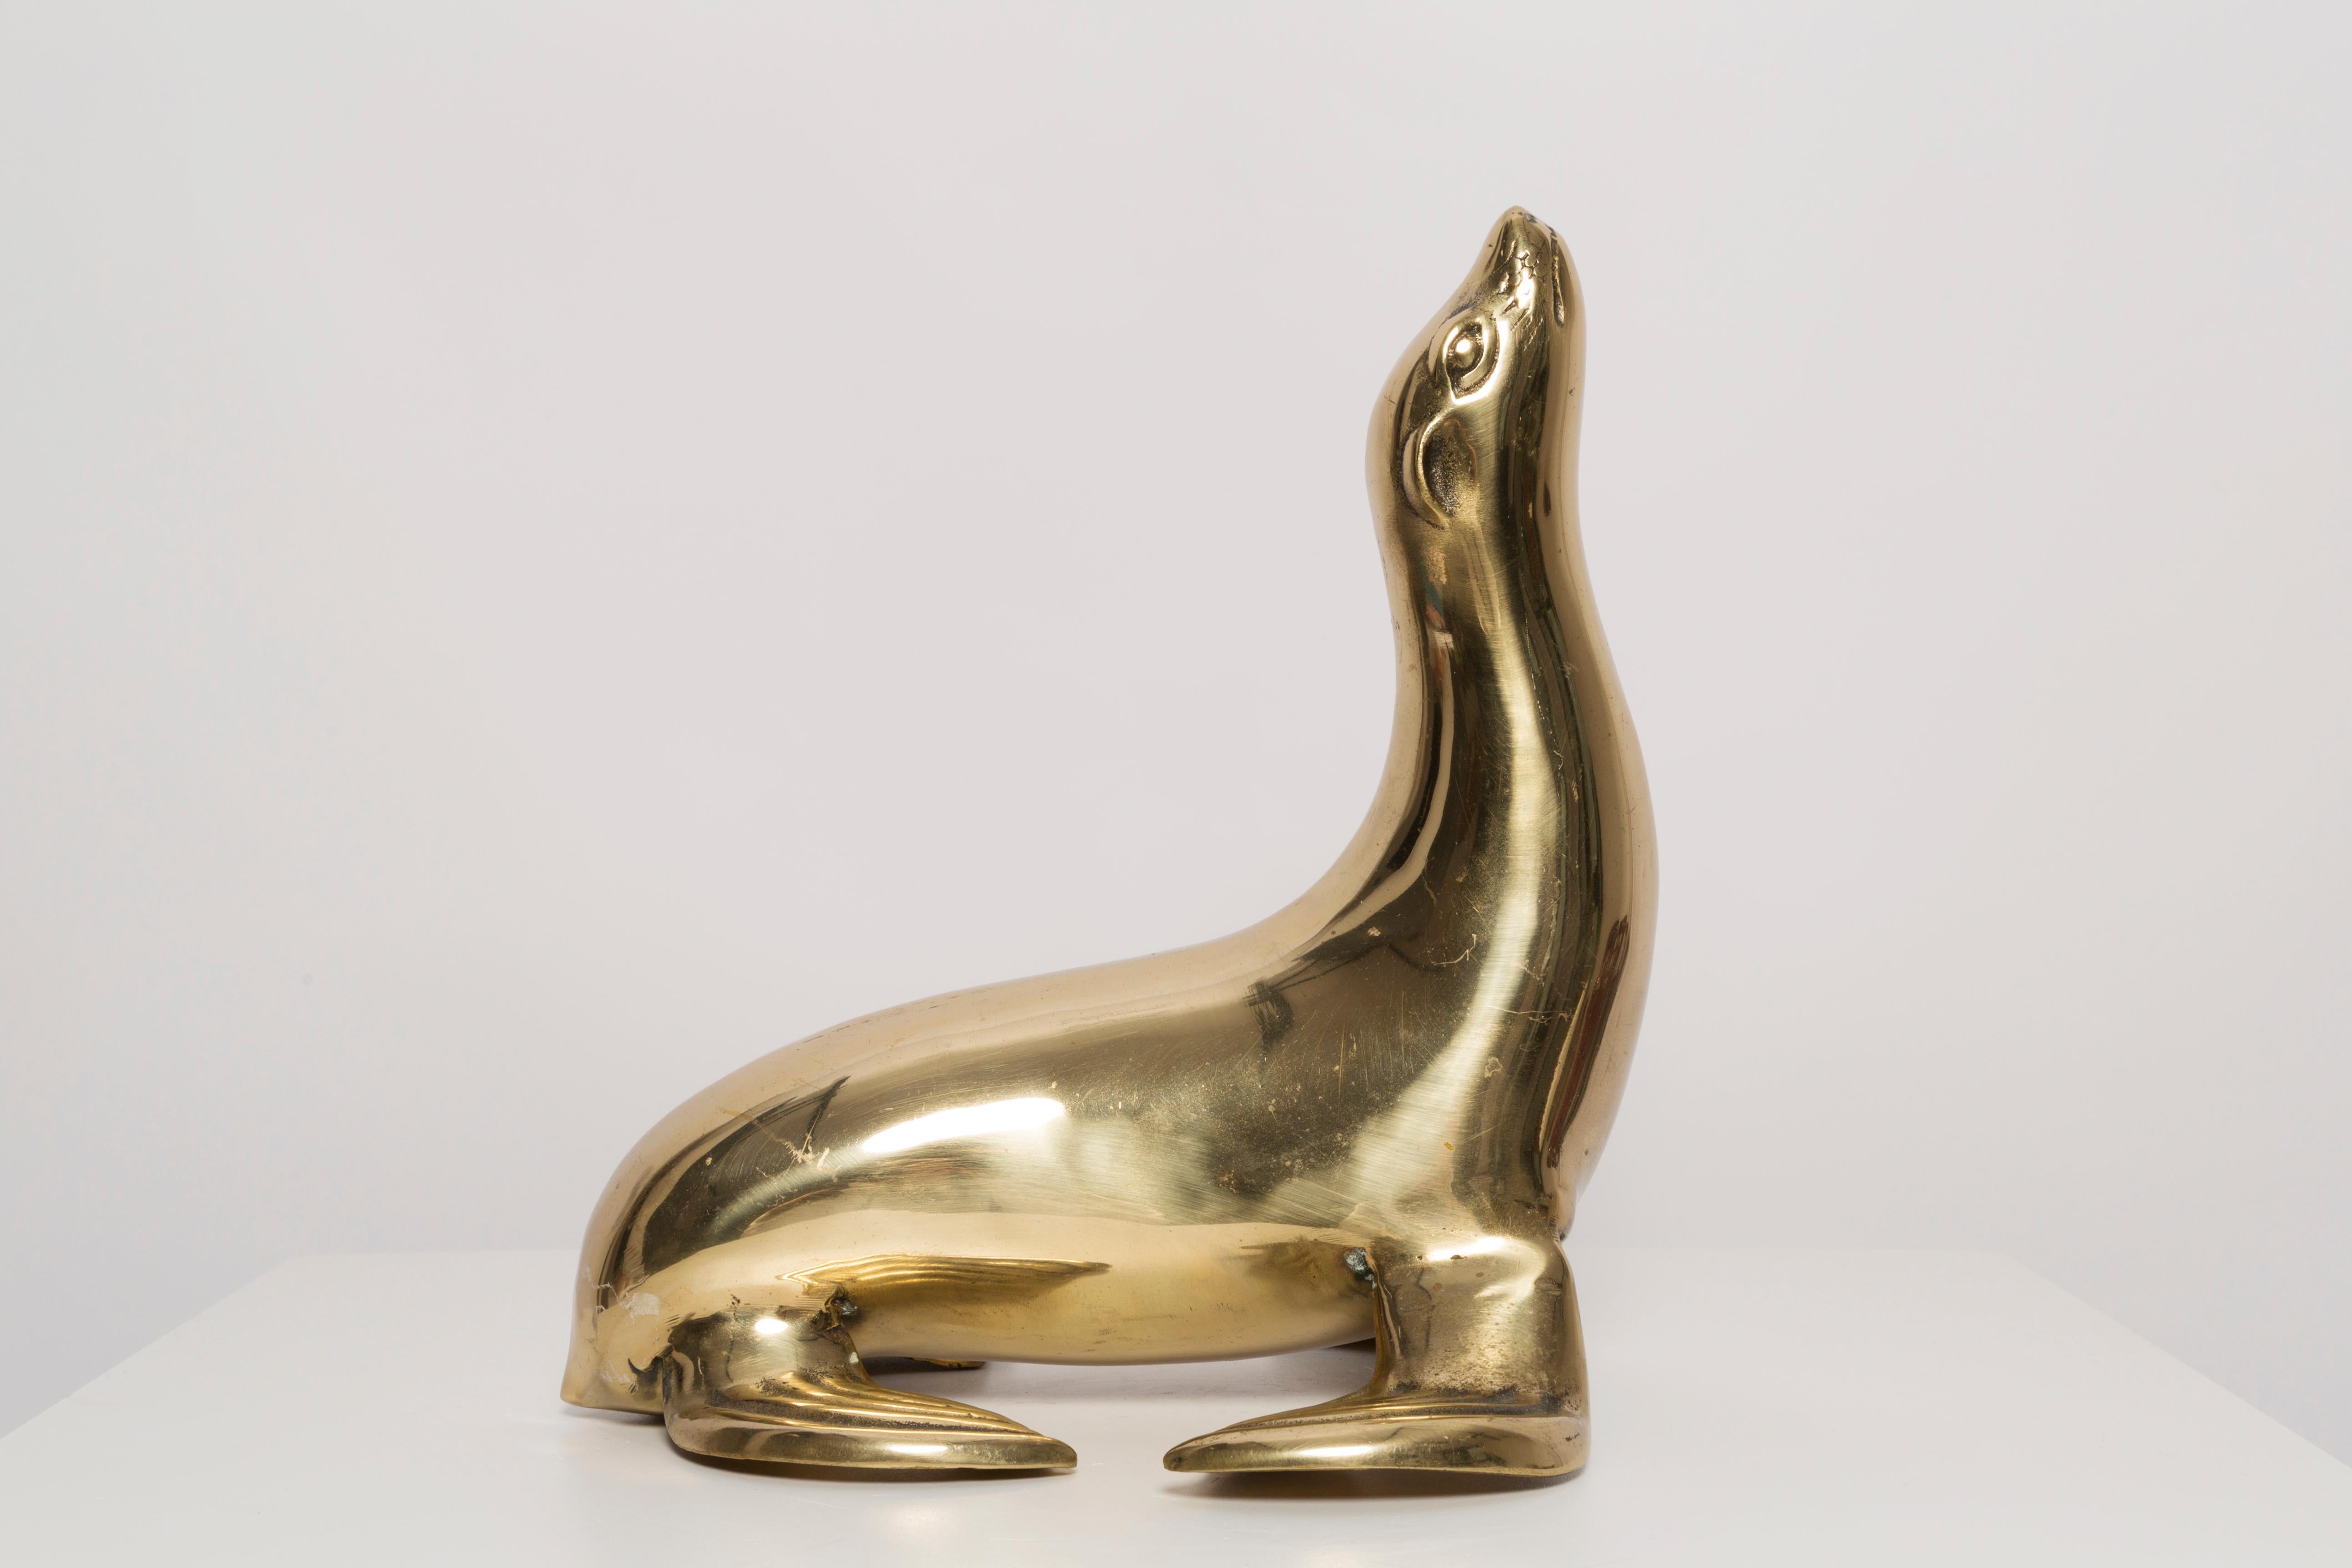 Mid century beautiful seal sculpture, Art Deco style, 1960s, produced in France, perfect original vintage condition. Only one unique piece.